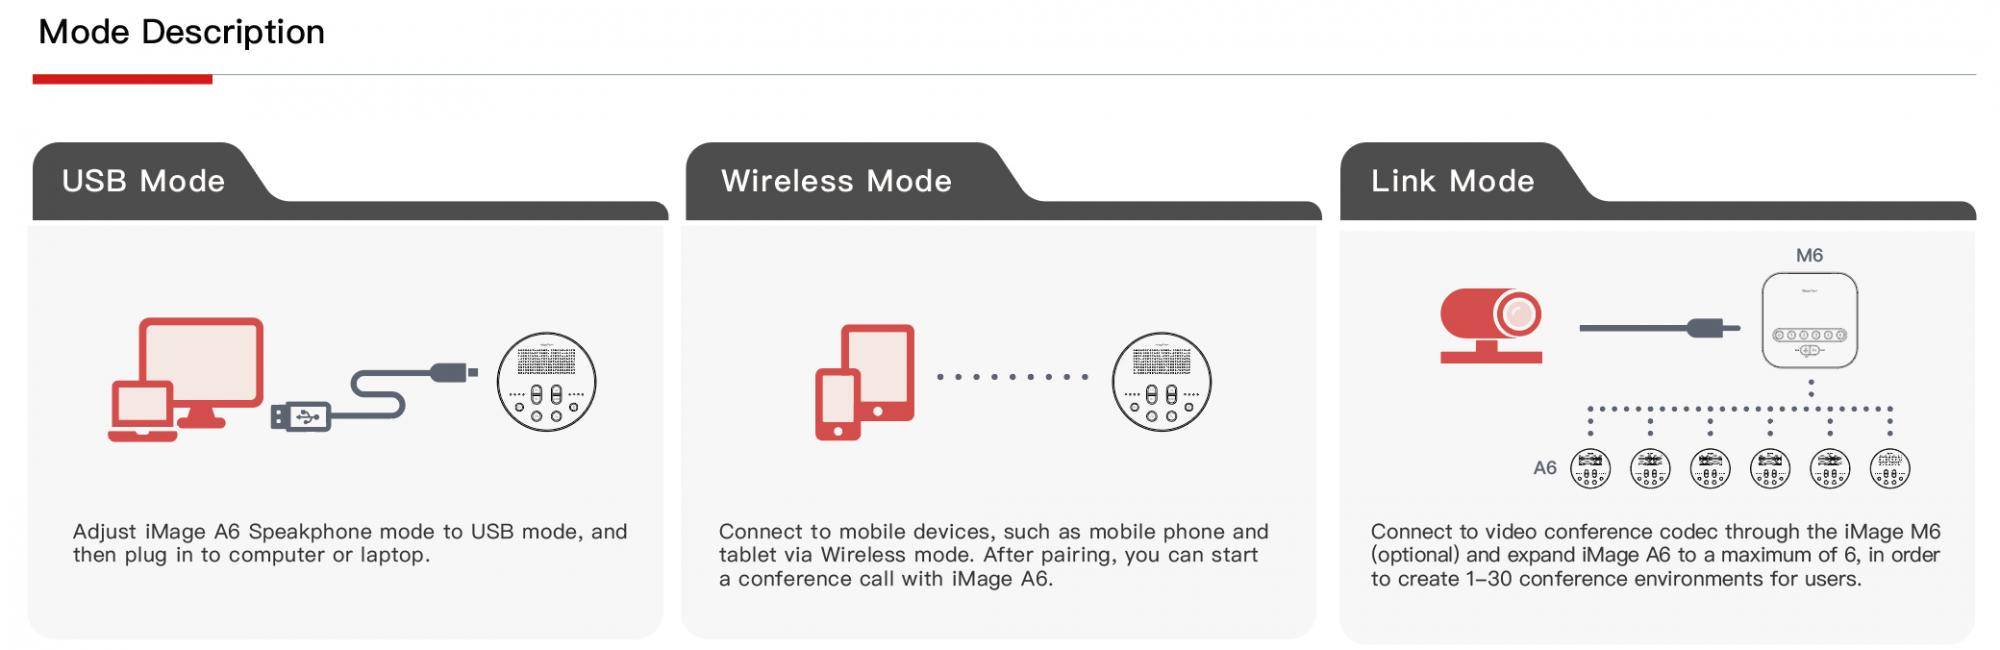 3 modes of iMage A6 wireless speakerphone